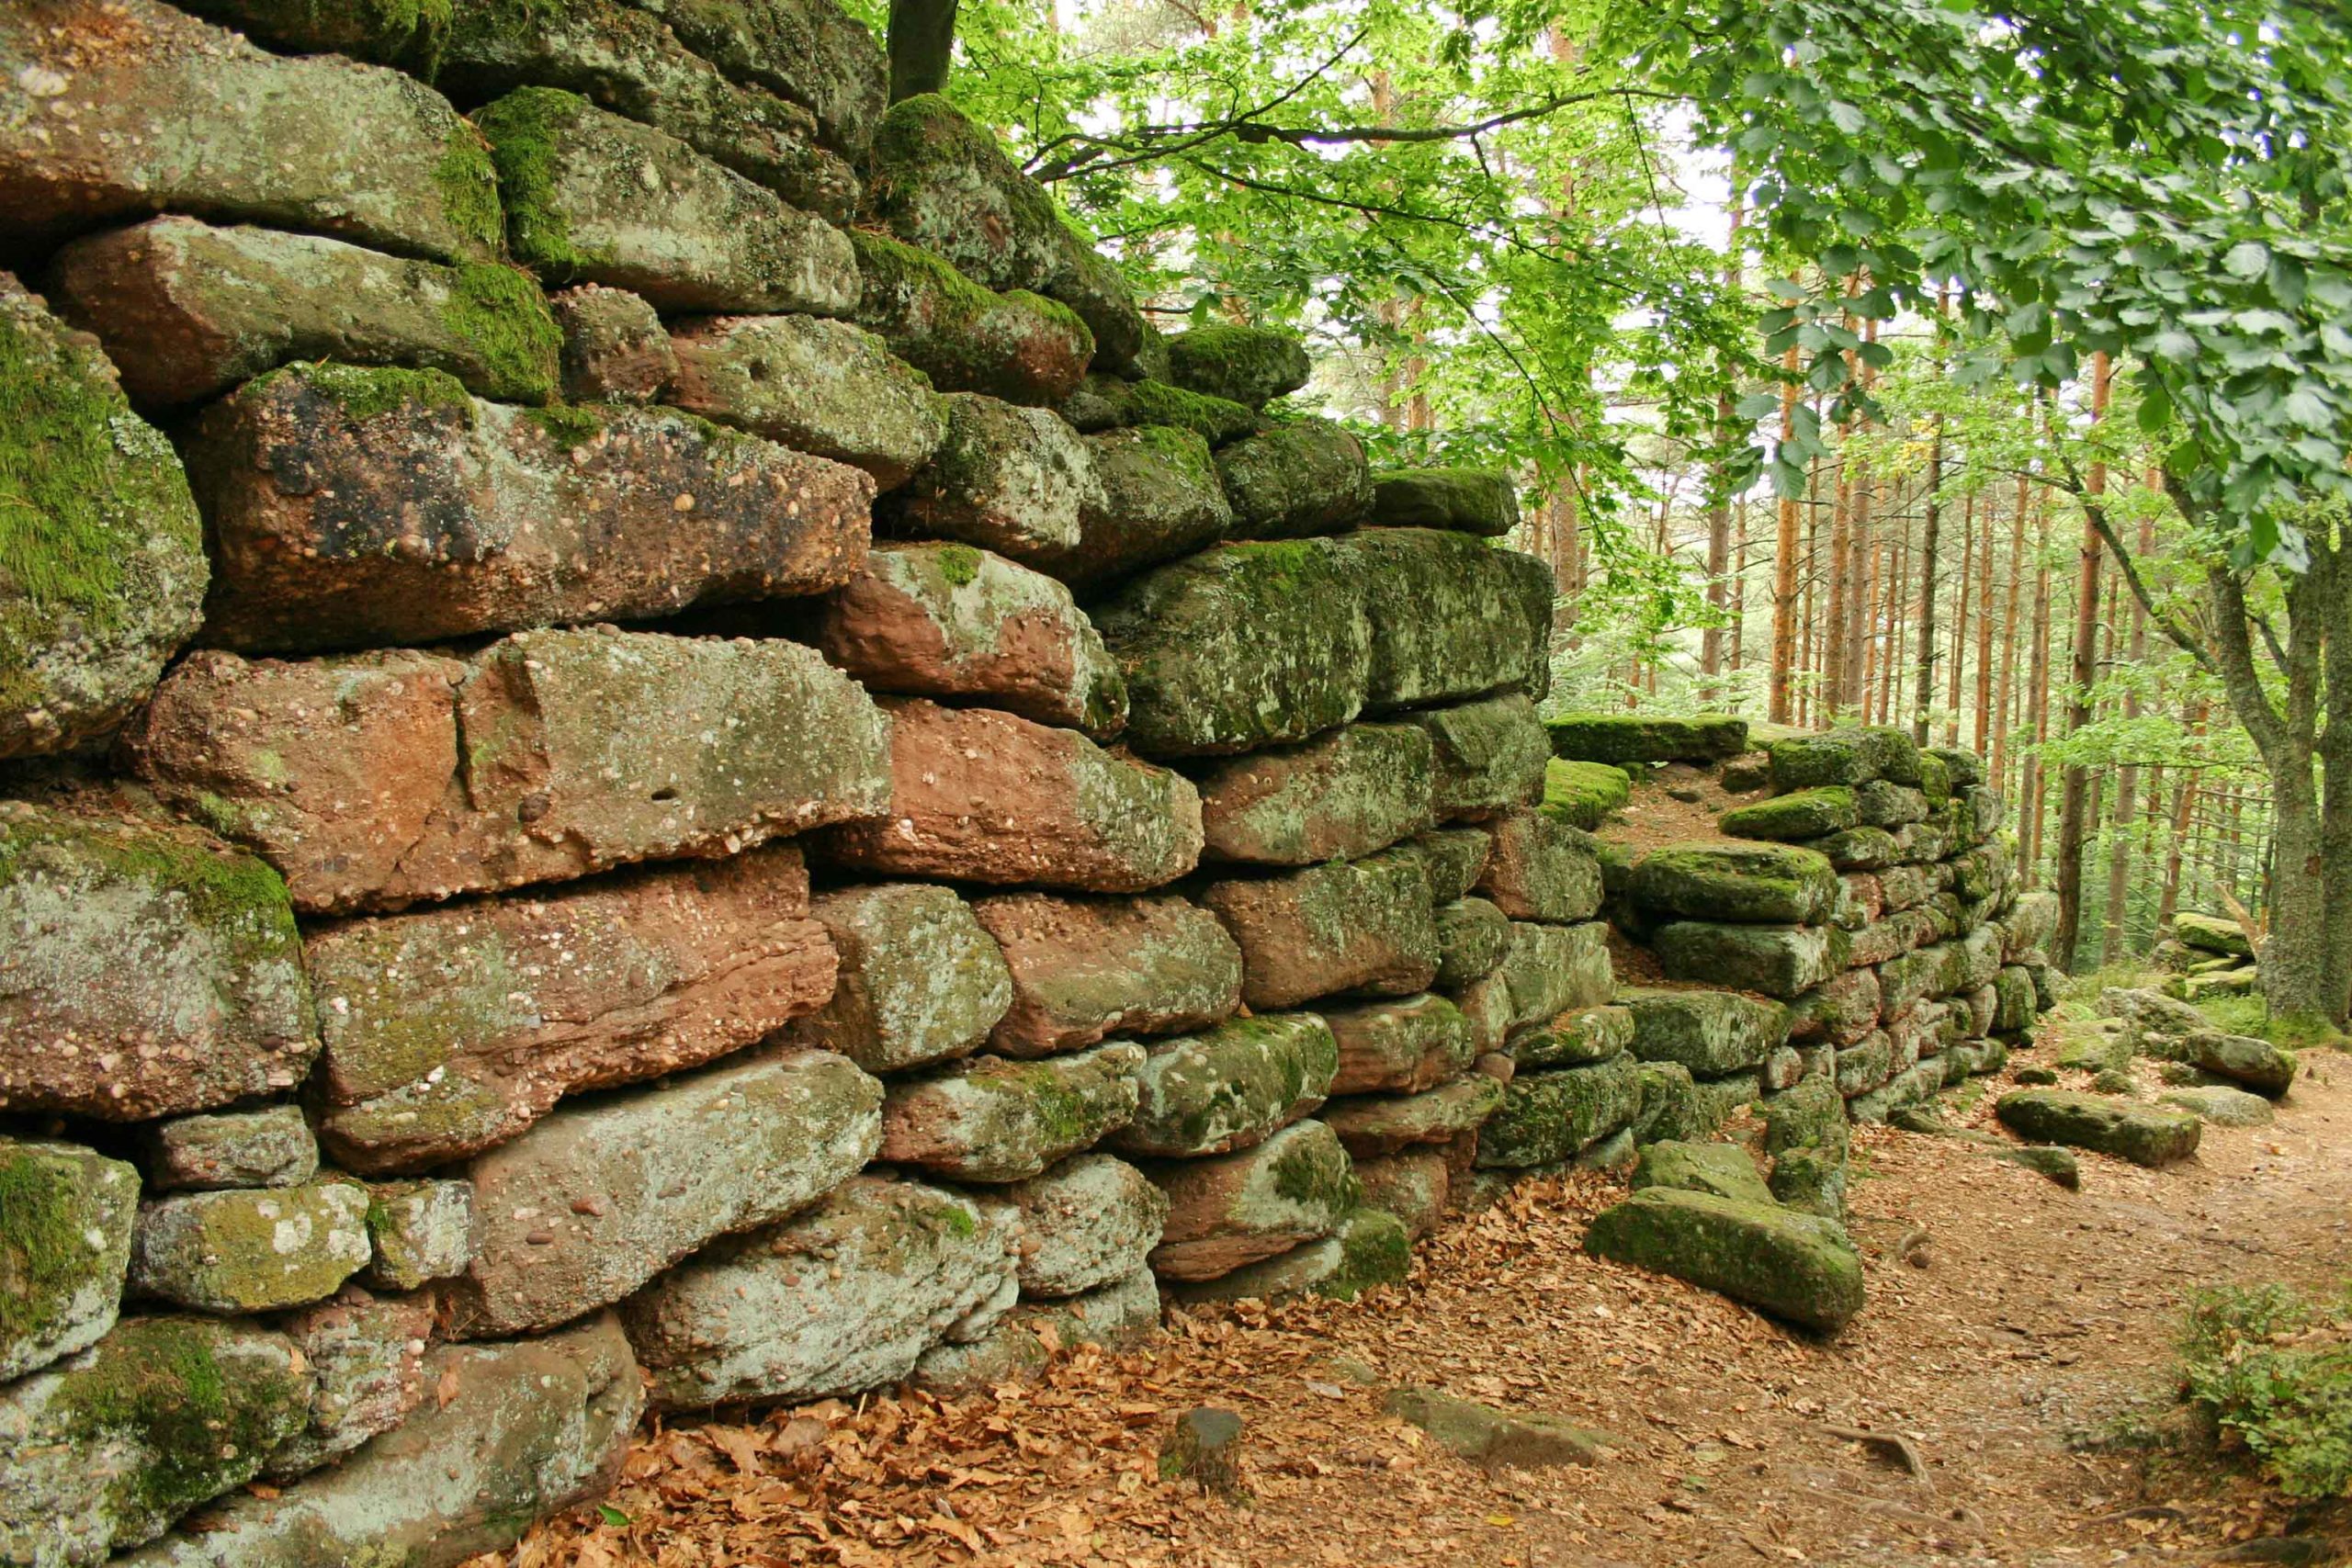 Pagan Wall of Mont Sainte Odile © Dietrich Krieger - licence [CC BY-SA 3.0] from Wikimedia Commons